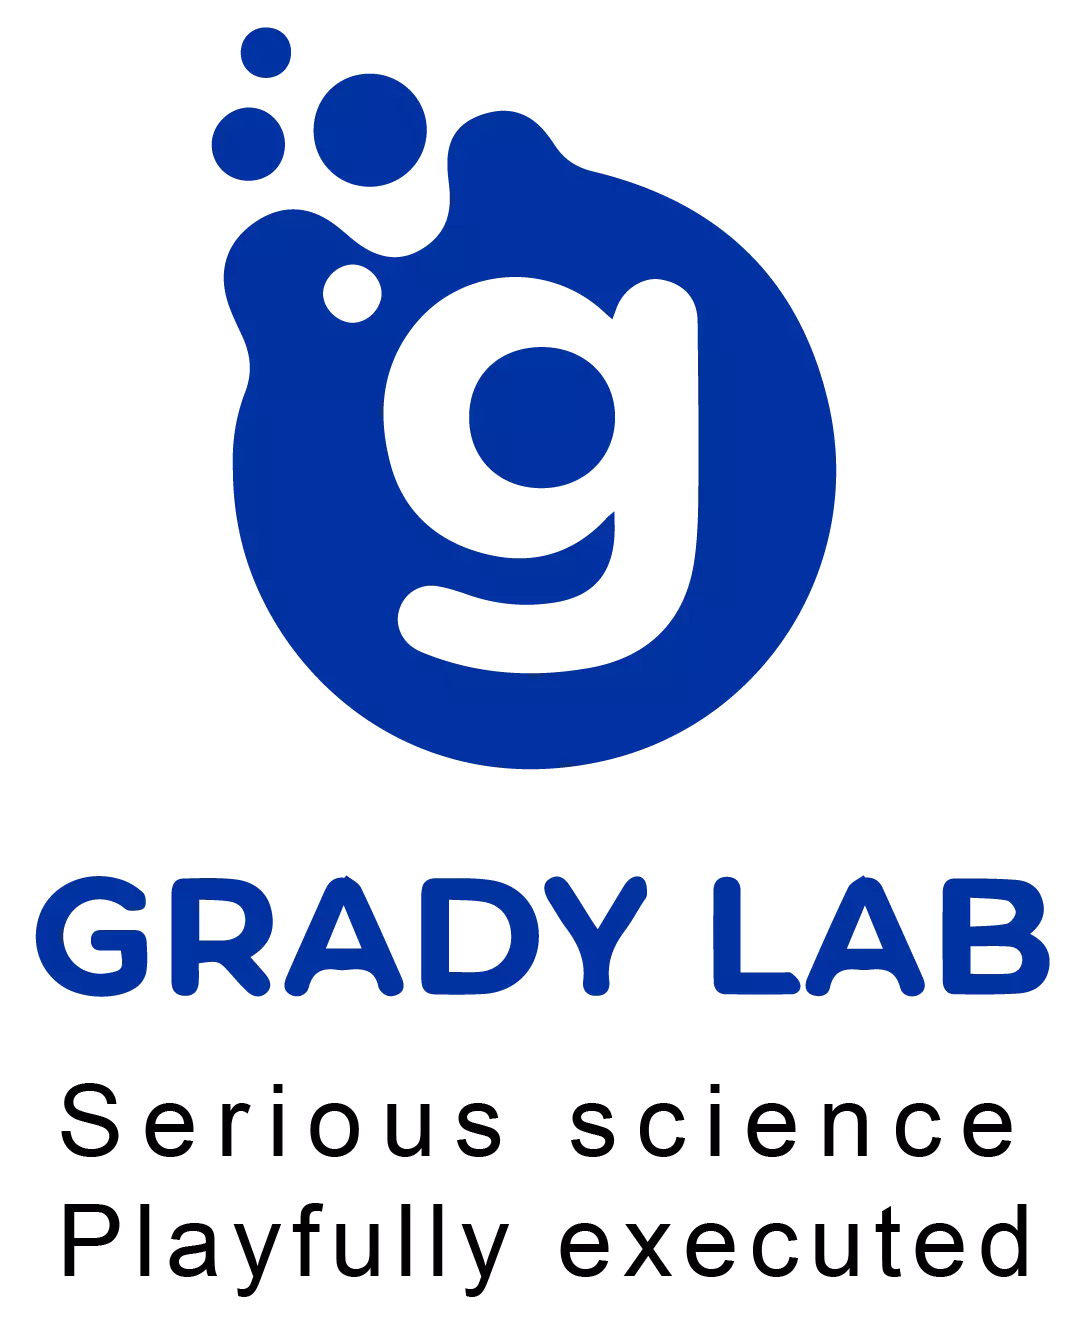 grady lab serious science playfully executed